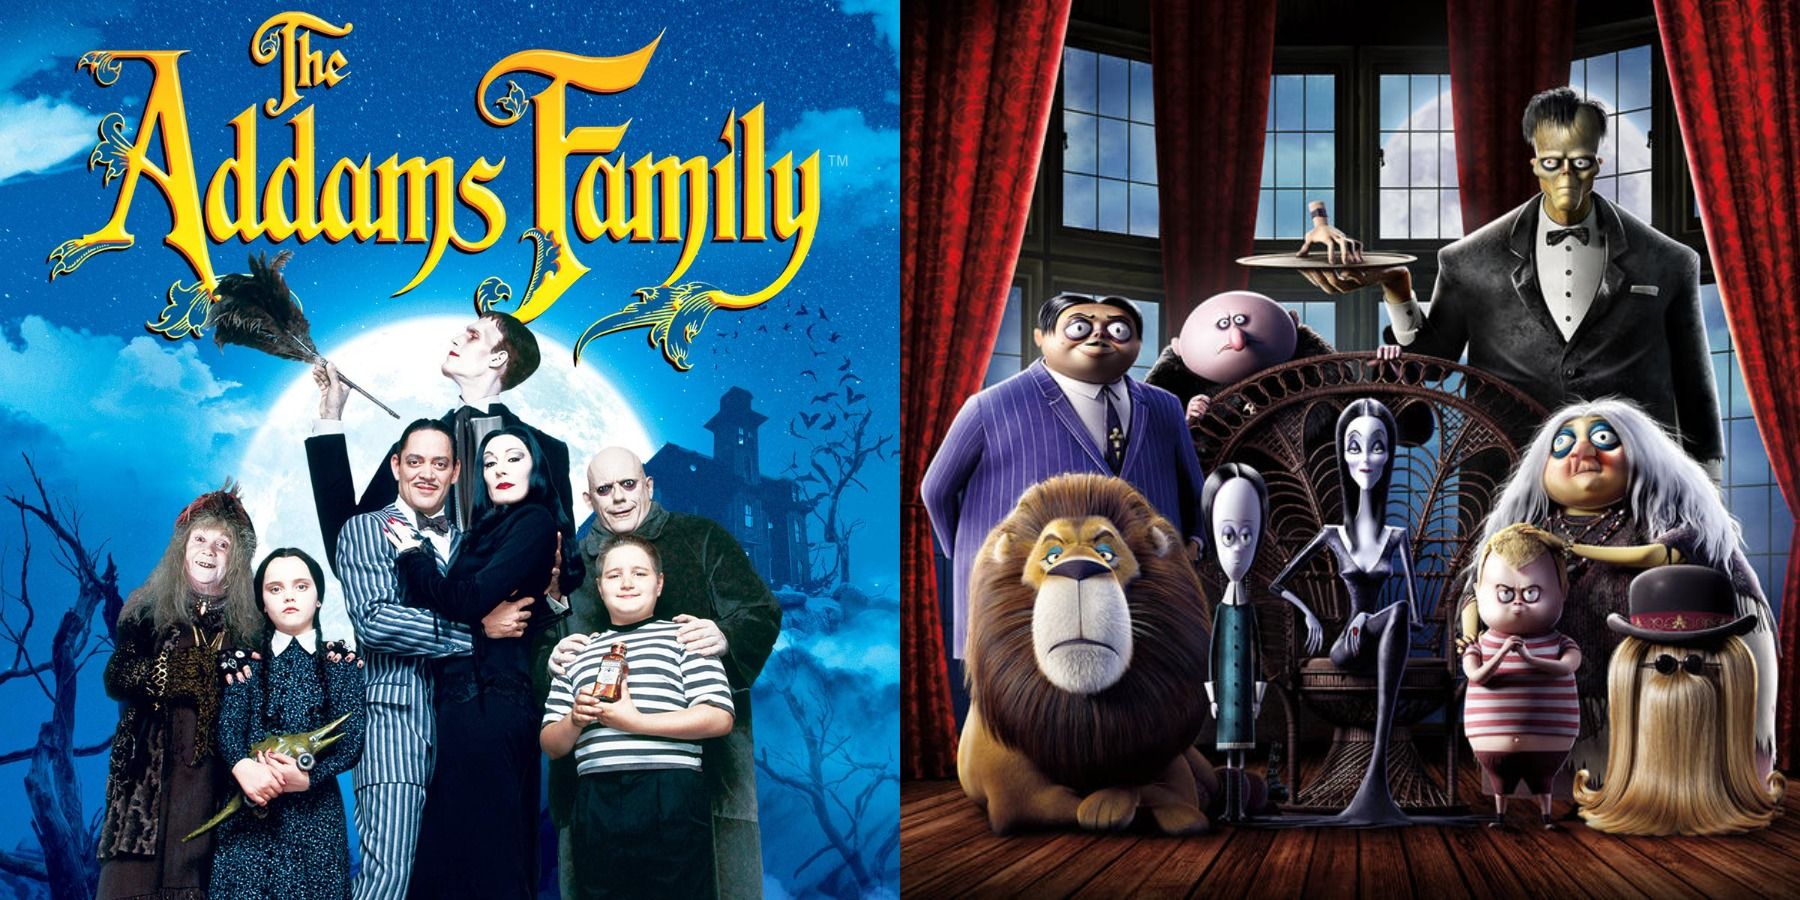 Live Action and Animated Addams Family Movie Posters